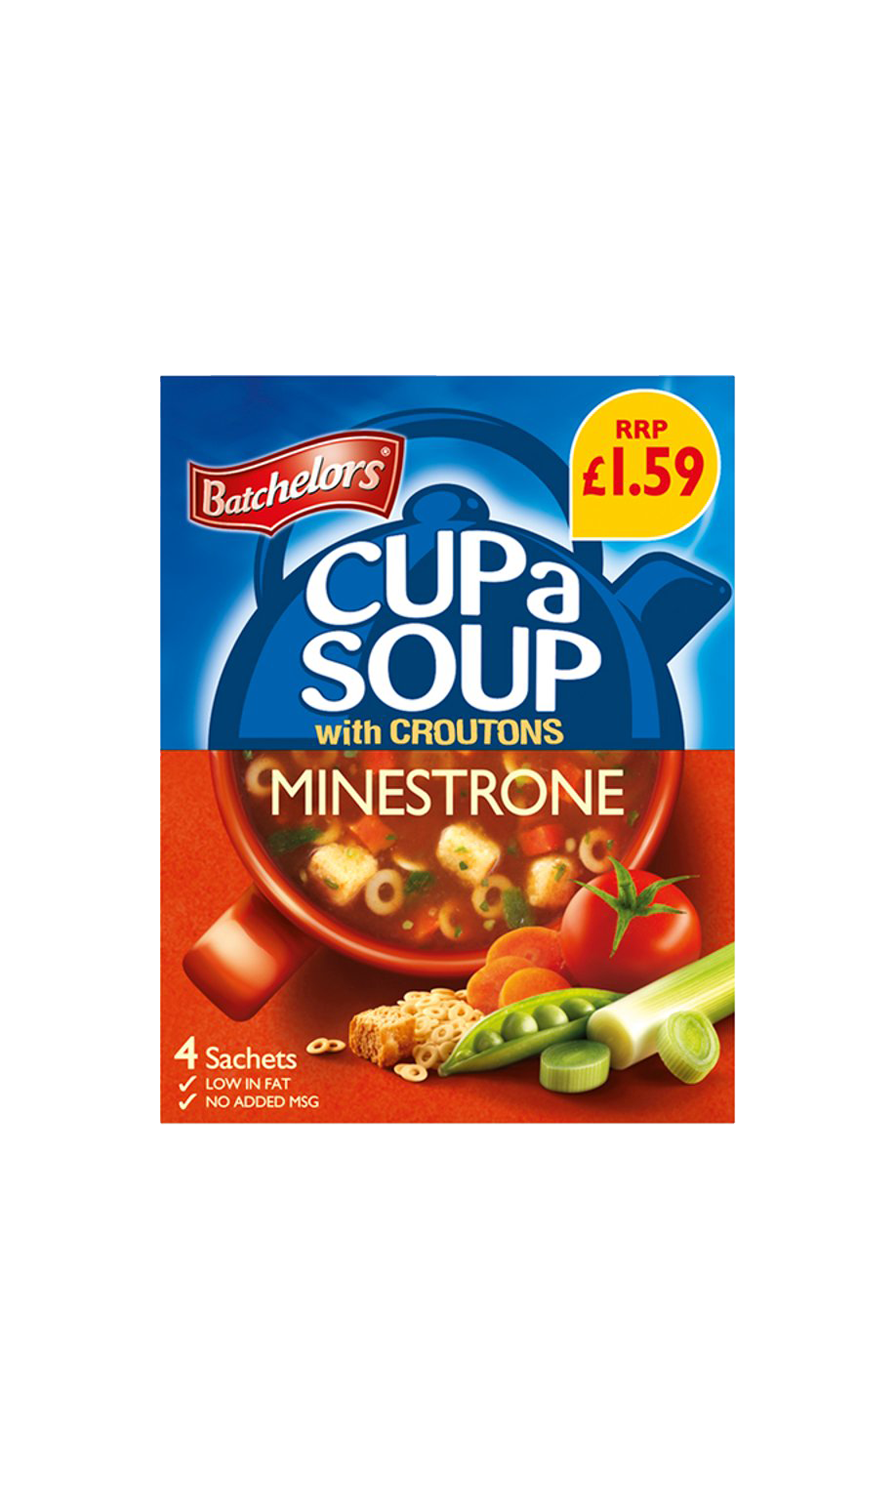 Batchelors Cup a Soup Minestrone with Croutons 94g